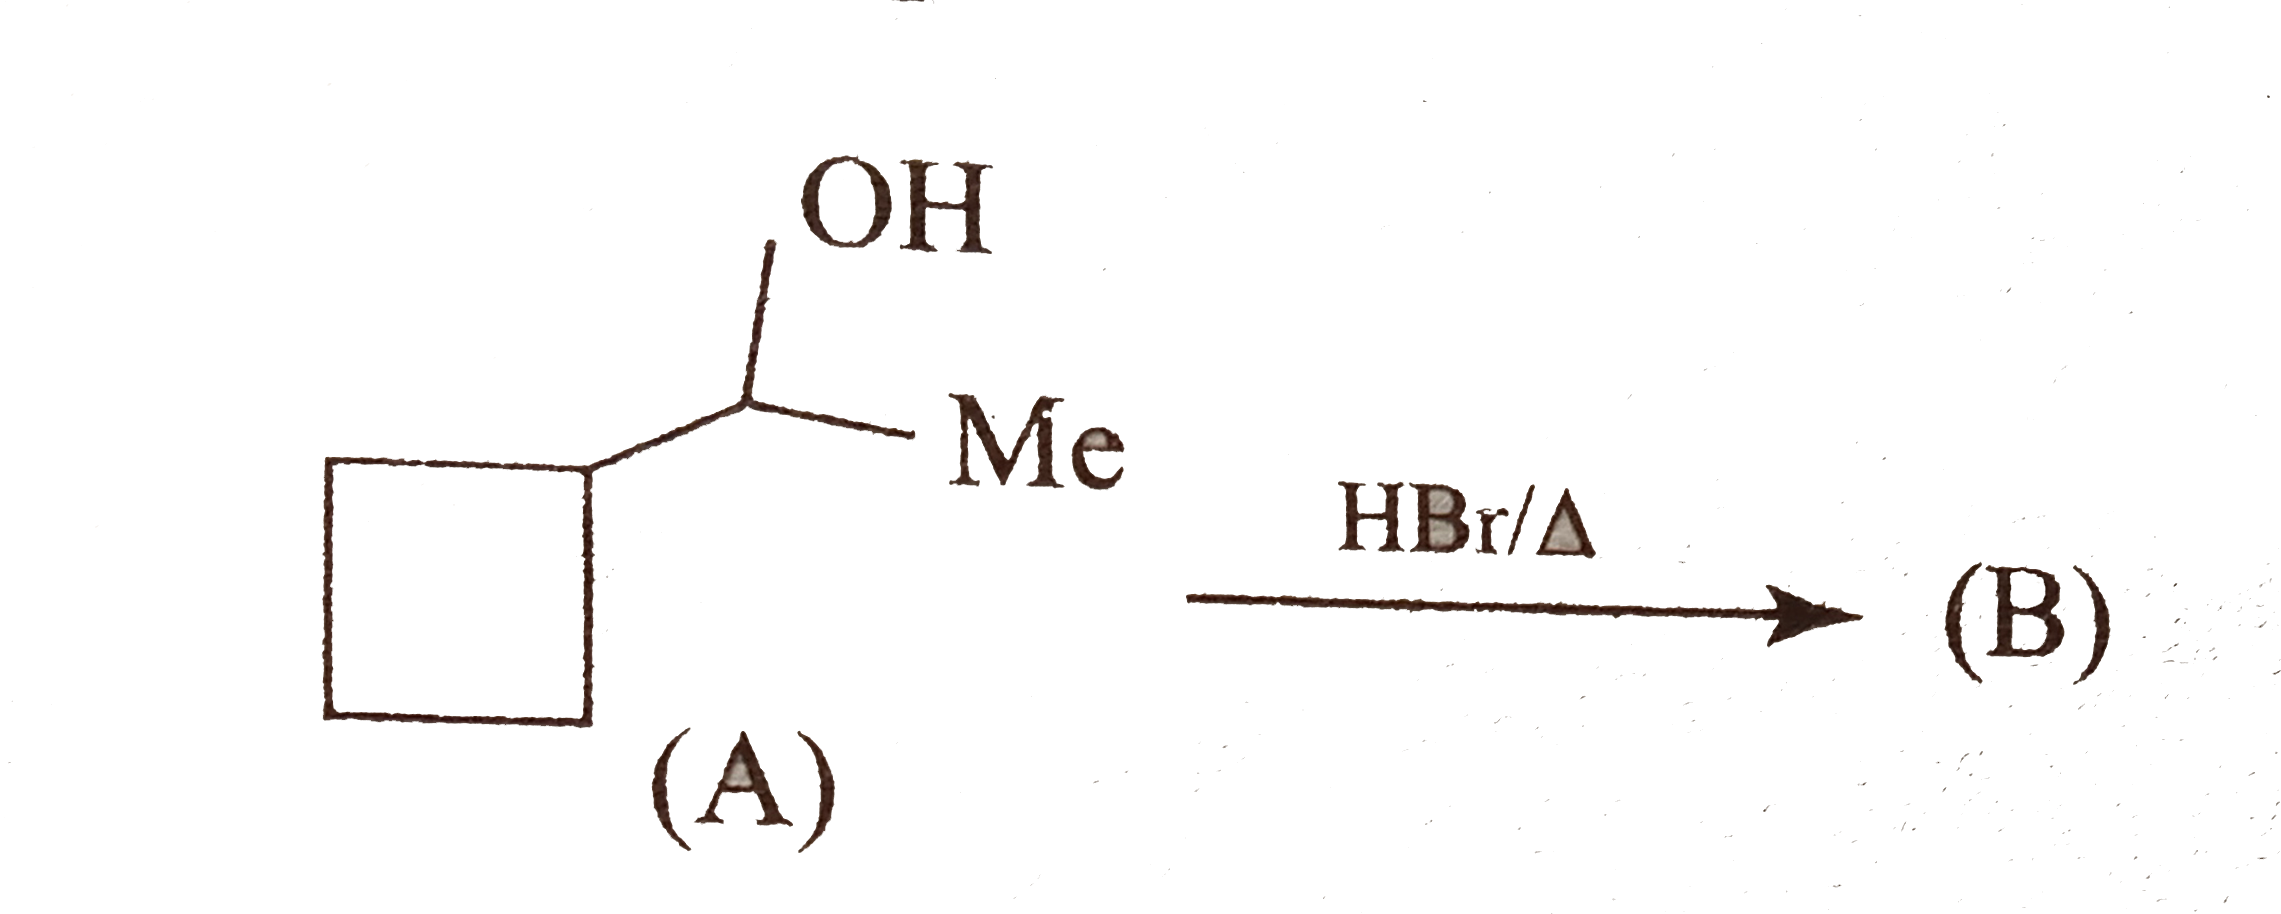 Give the major product and mechanism involved in the following reaction.